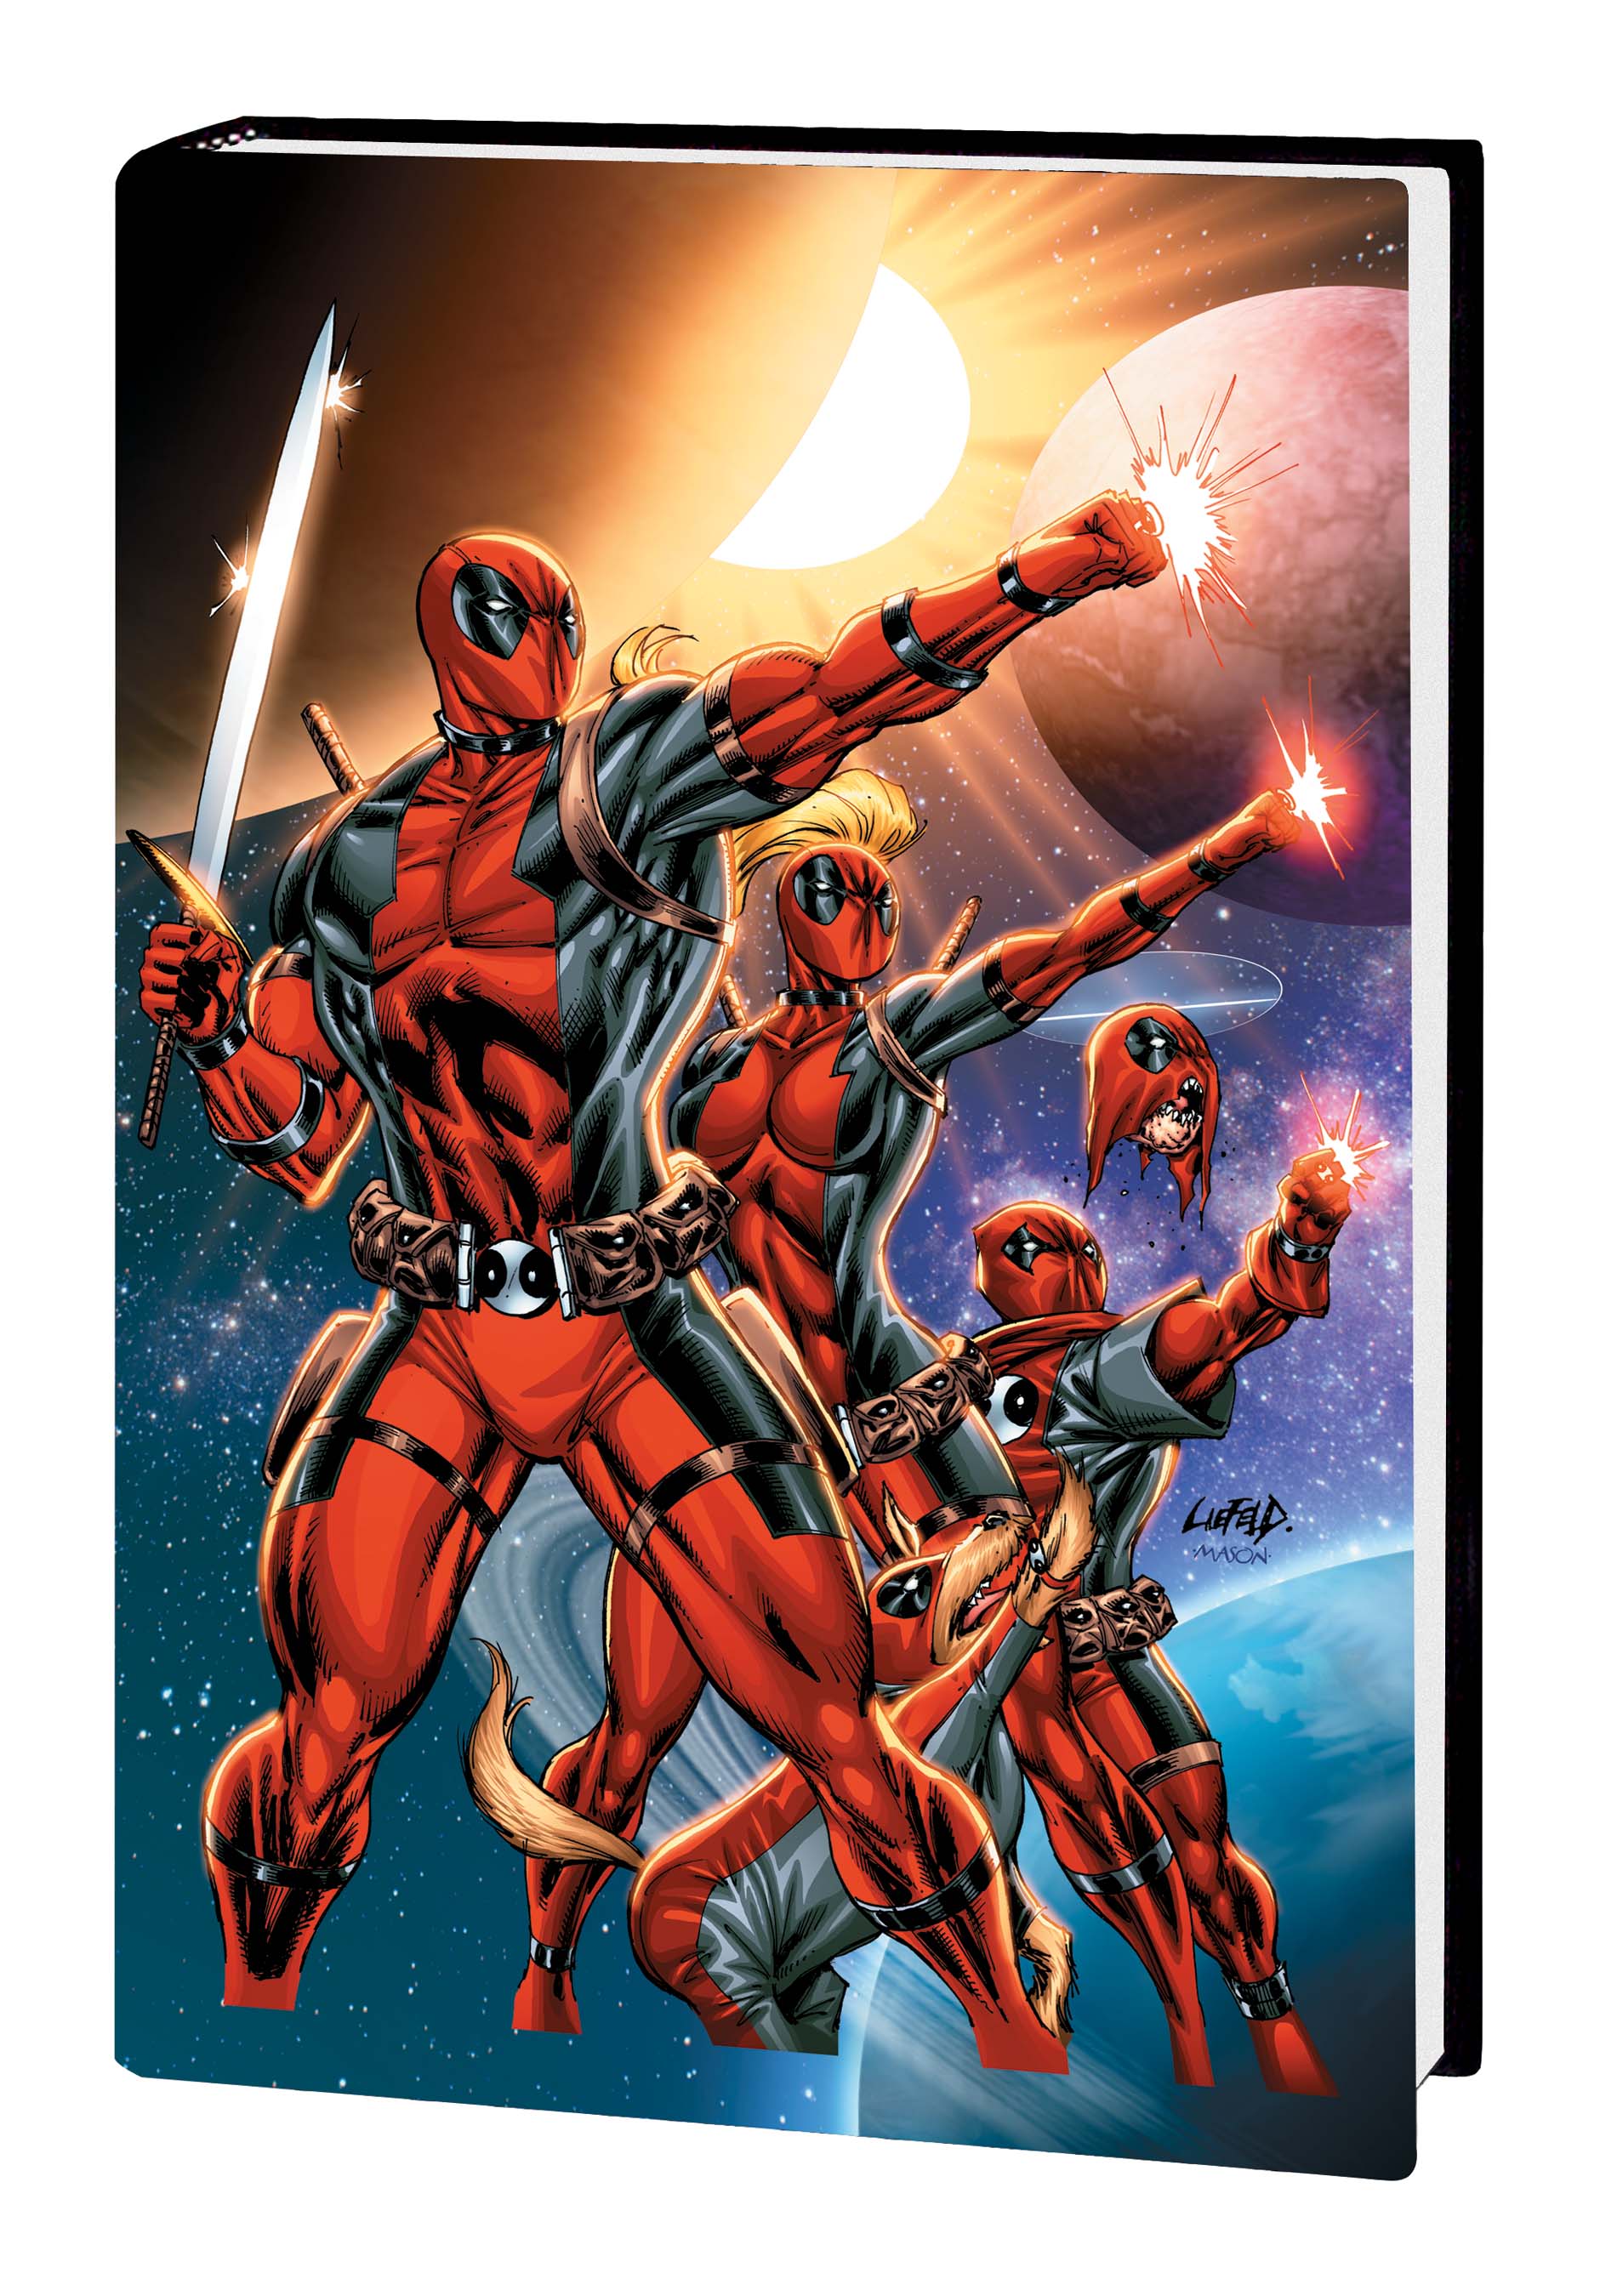 Deadpool Corps Vol. 2: You Say You Want A Revolution (Hardcover)